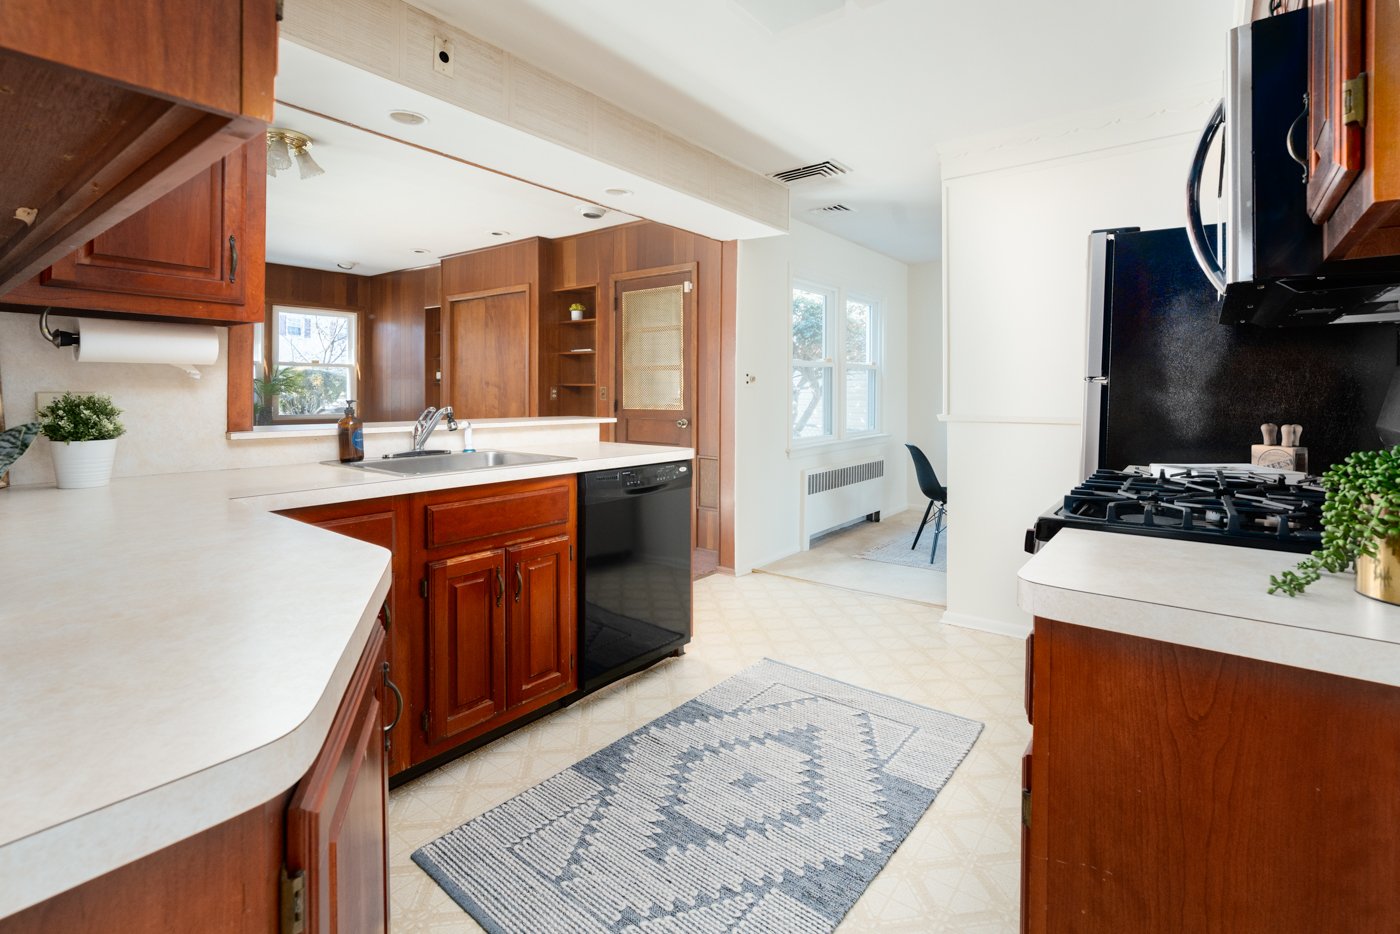 KITCHEN 1354 Brookfall real estate (Low res) (6 of 42).jpg